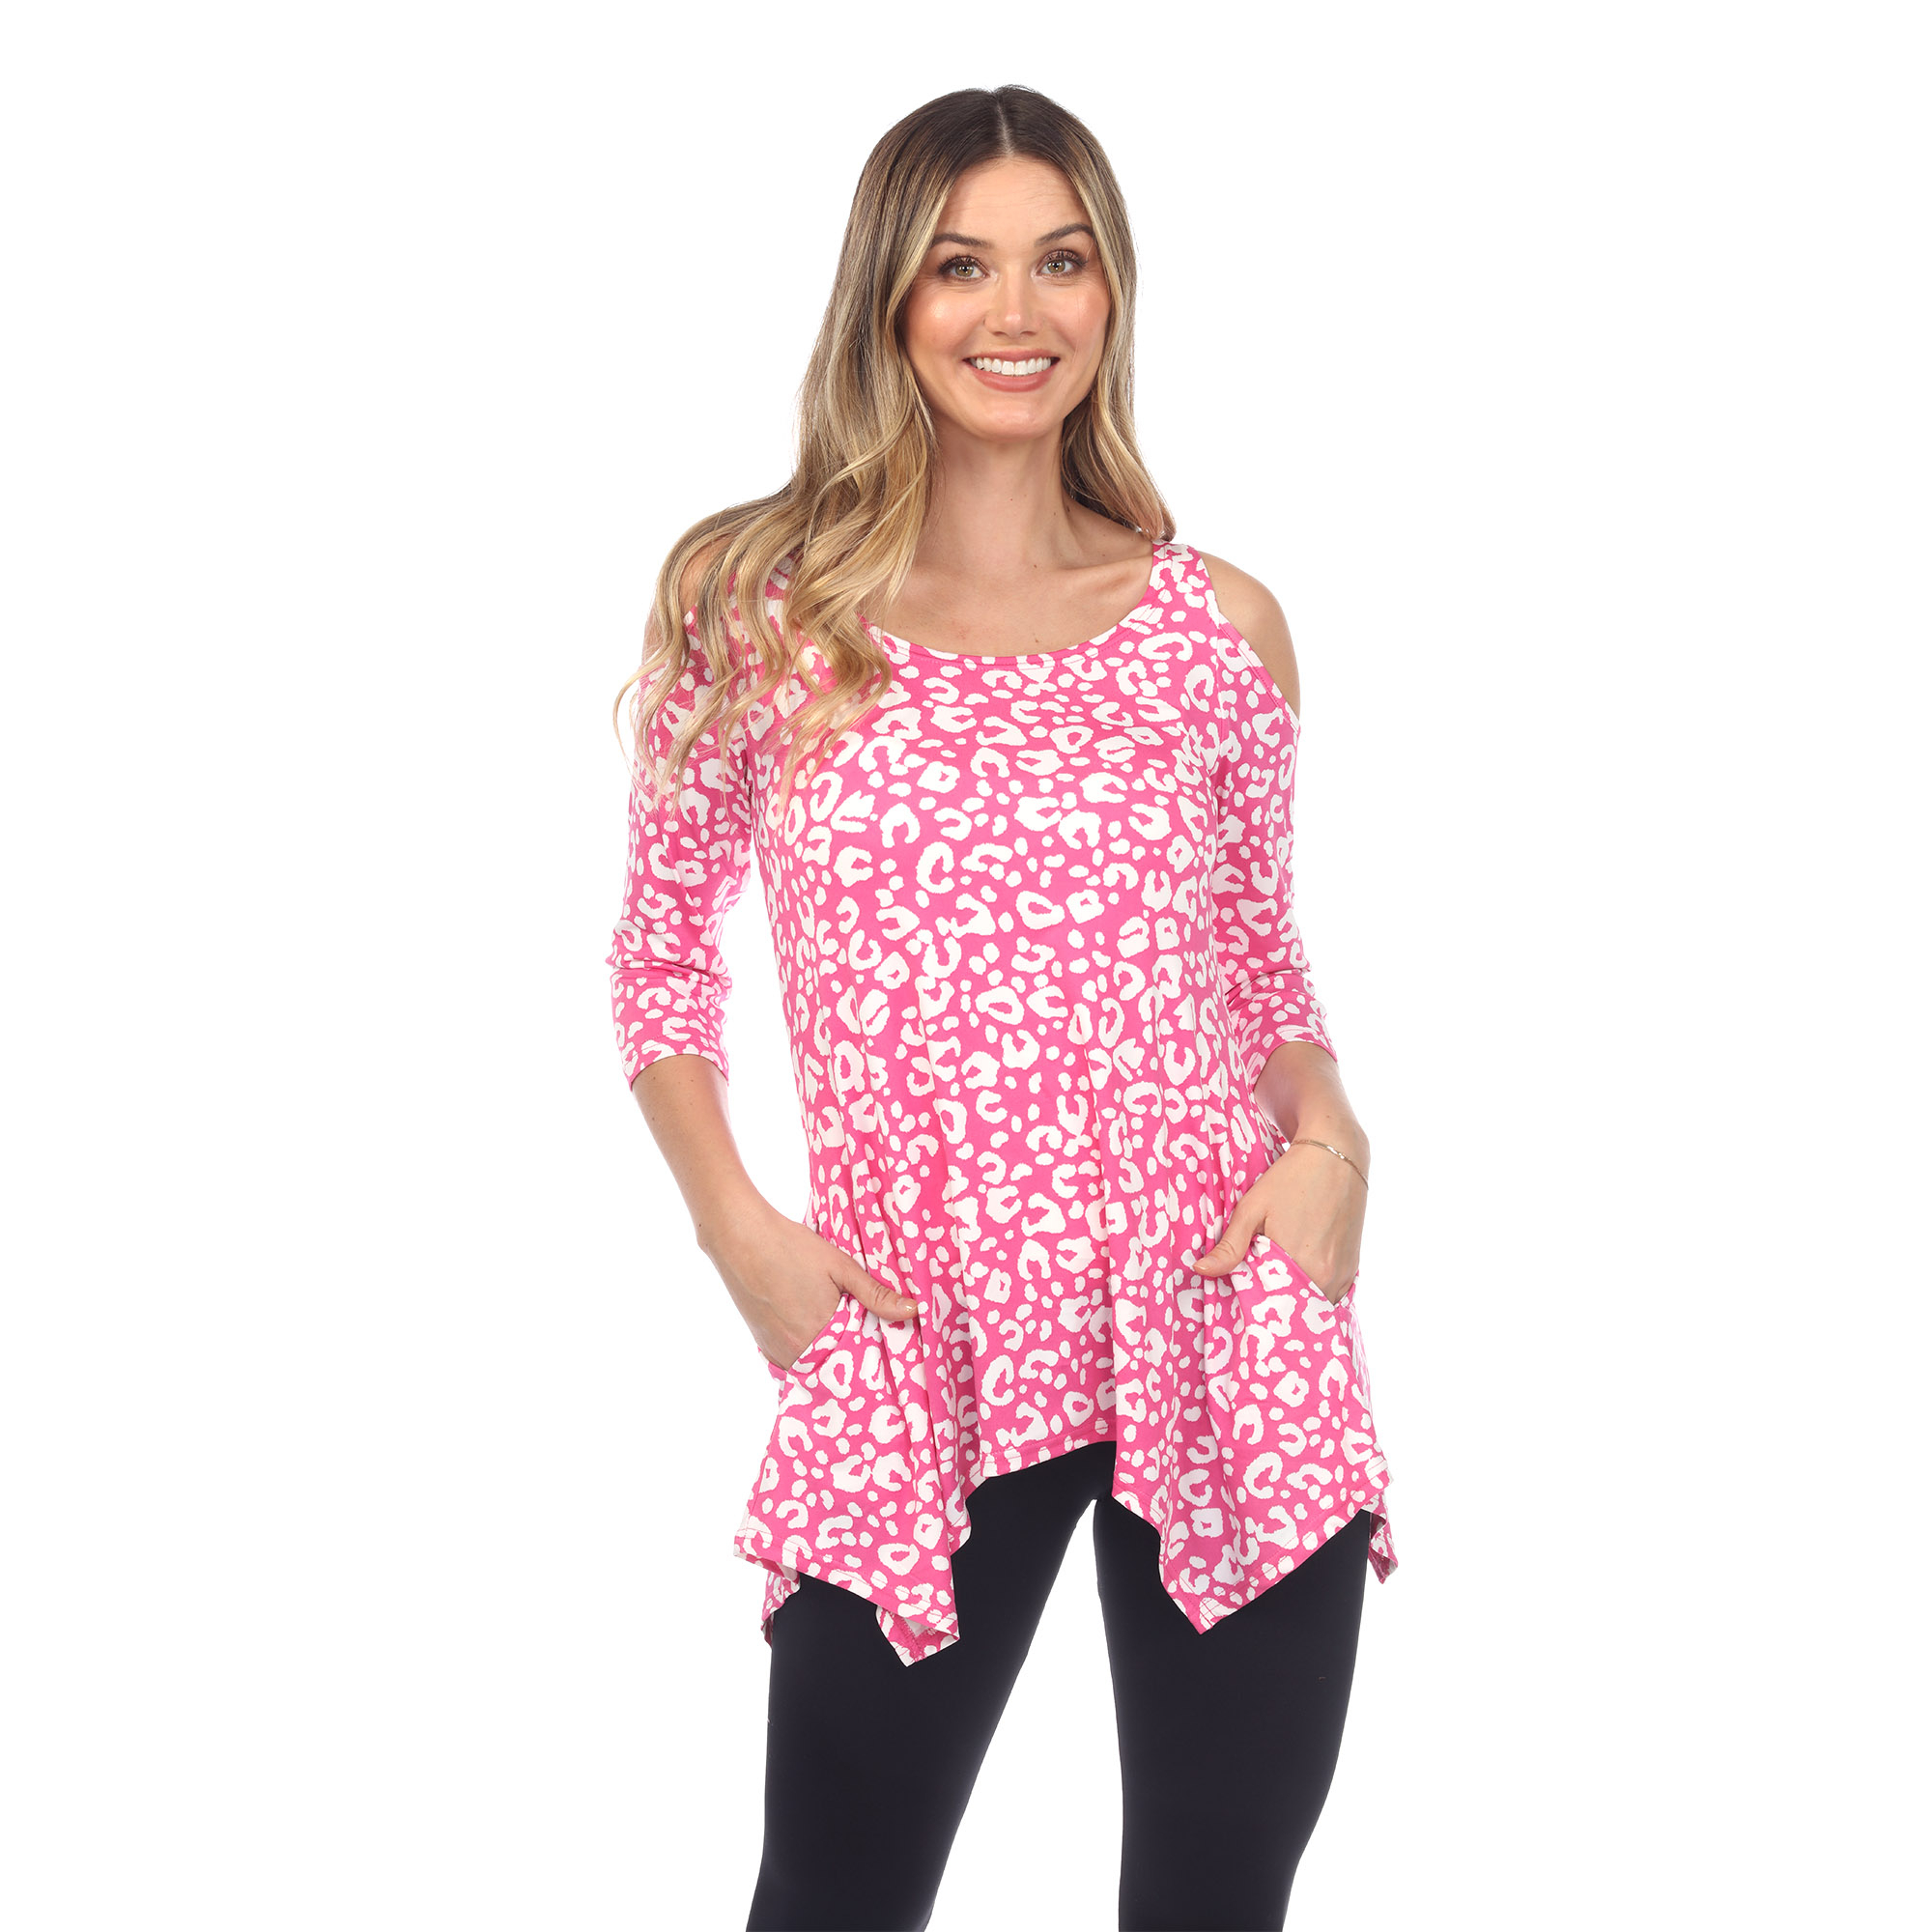 White Mark Women's Leopard Print Cold Shoulder Tunic Top With Pockets - Fuchsia, X-Large